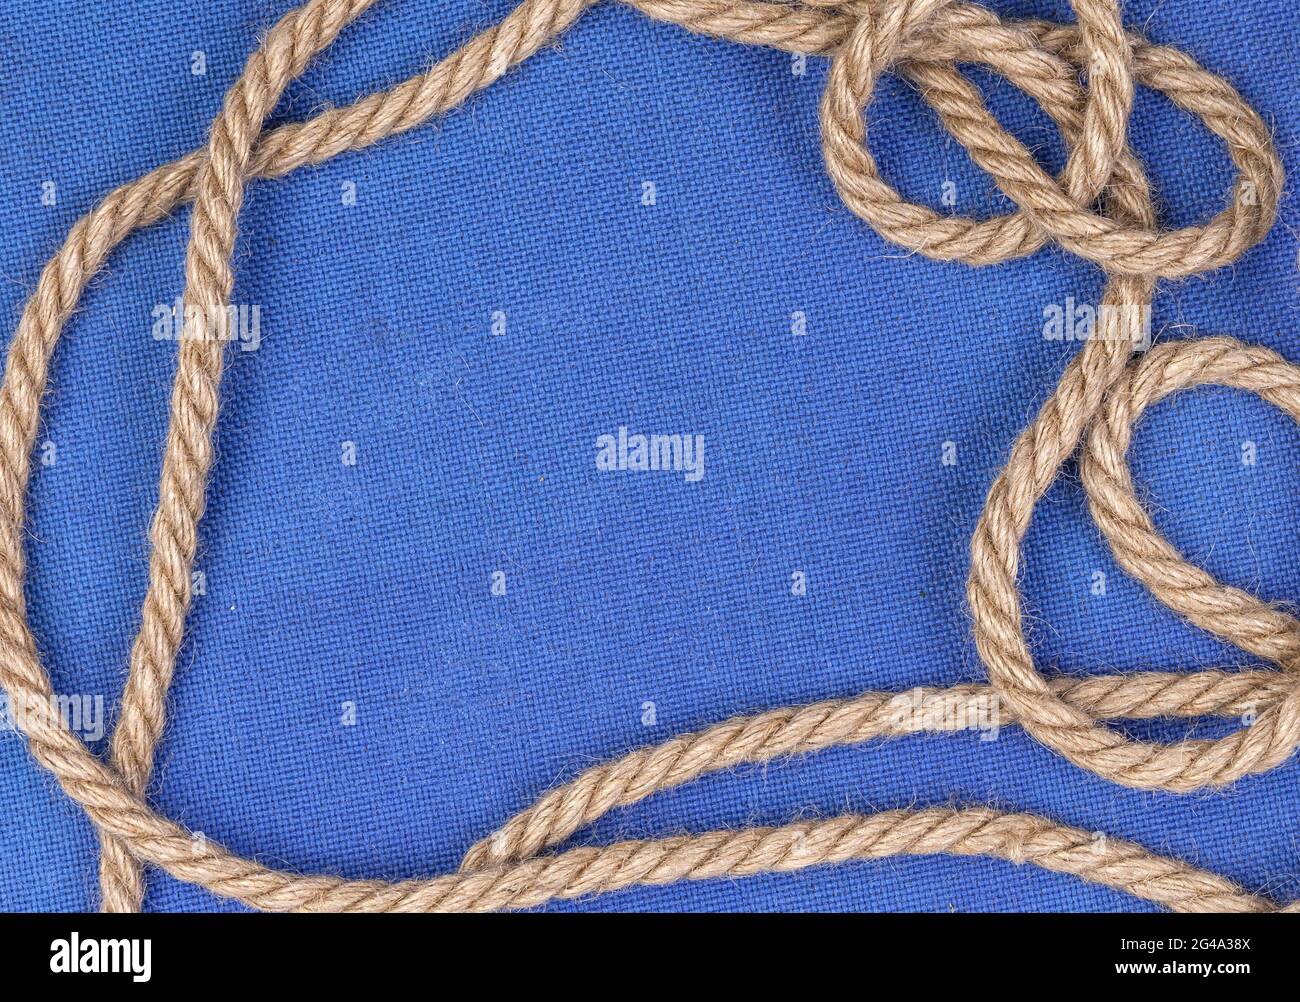 Rope on blue canvas background Stock Photo